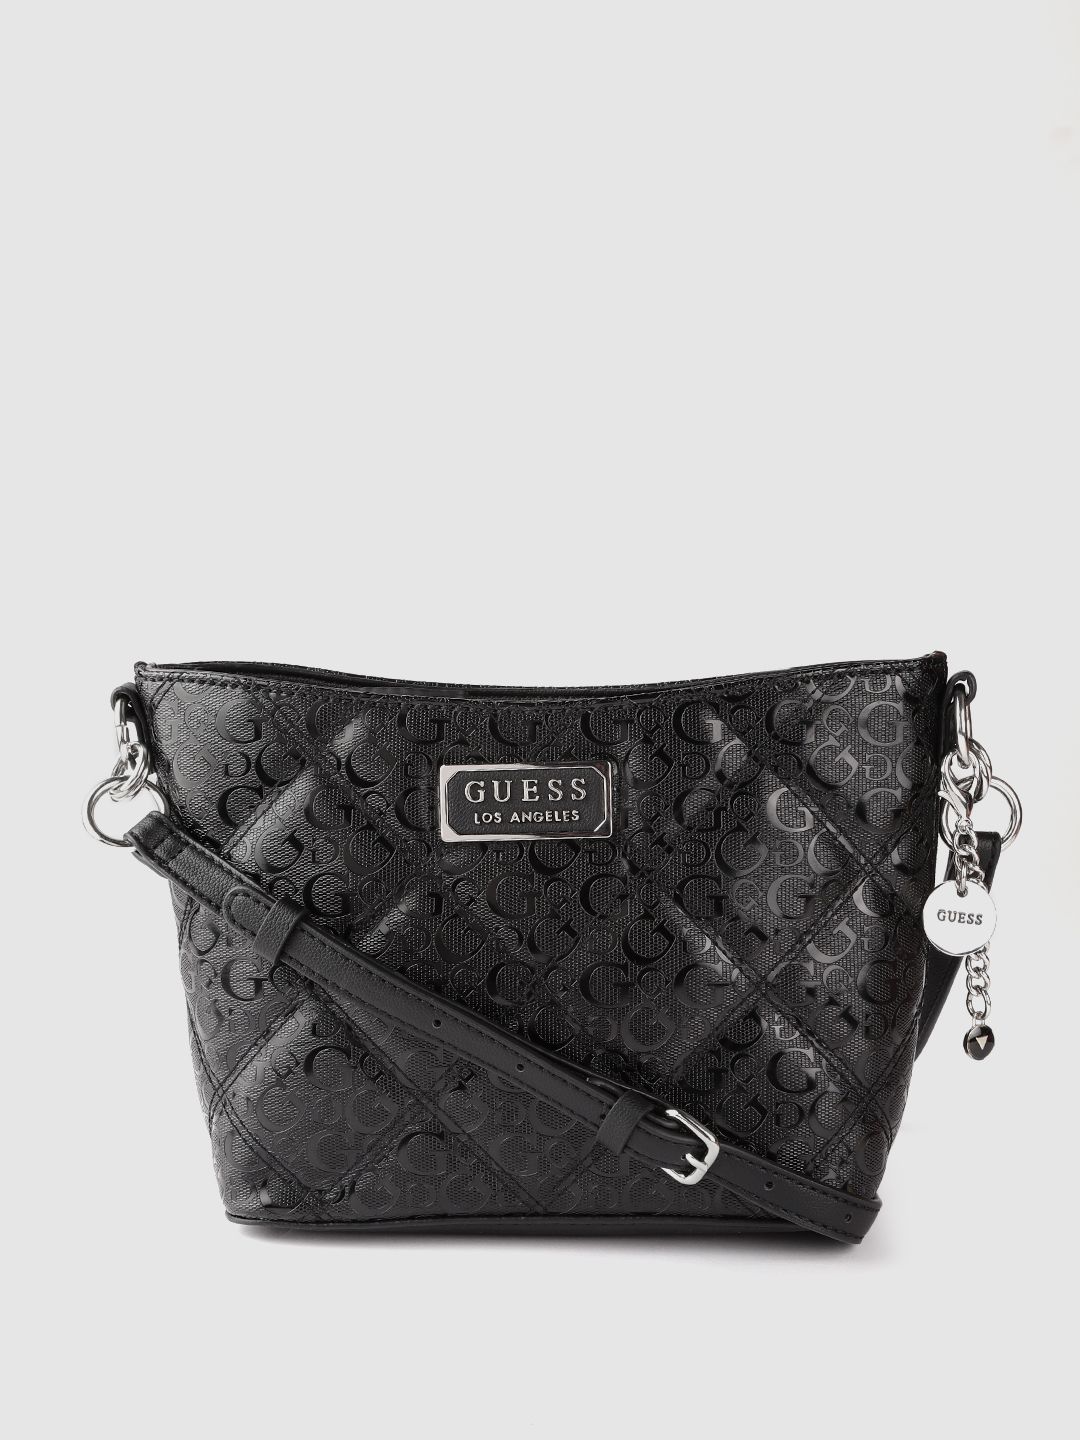 GUESS Black Quilted Structured Sling Bag with Tab & Non Detachable Sling Strap Price in India